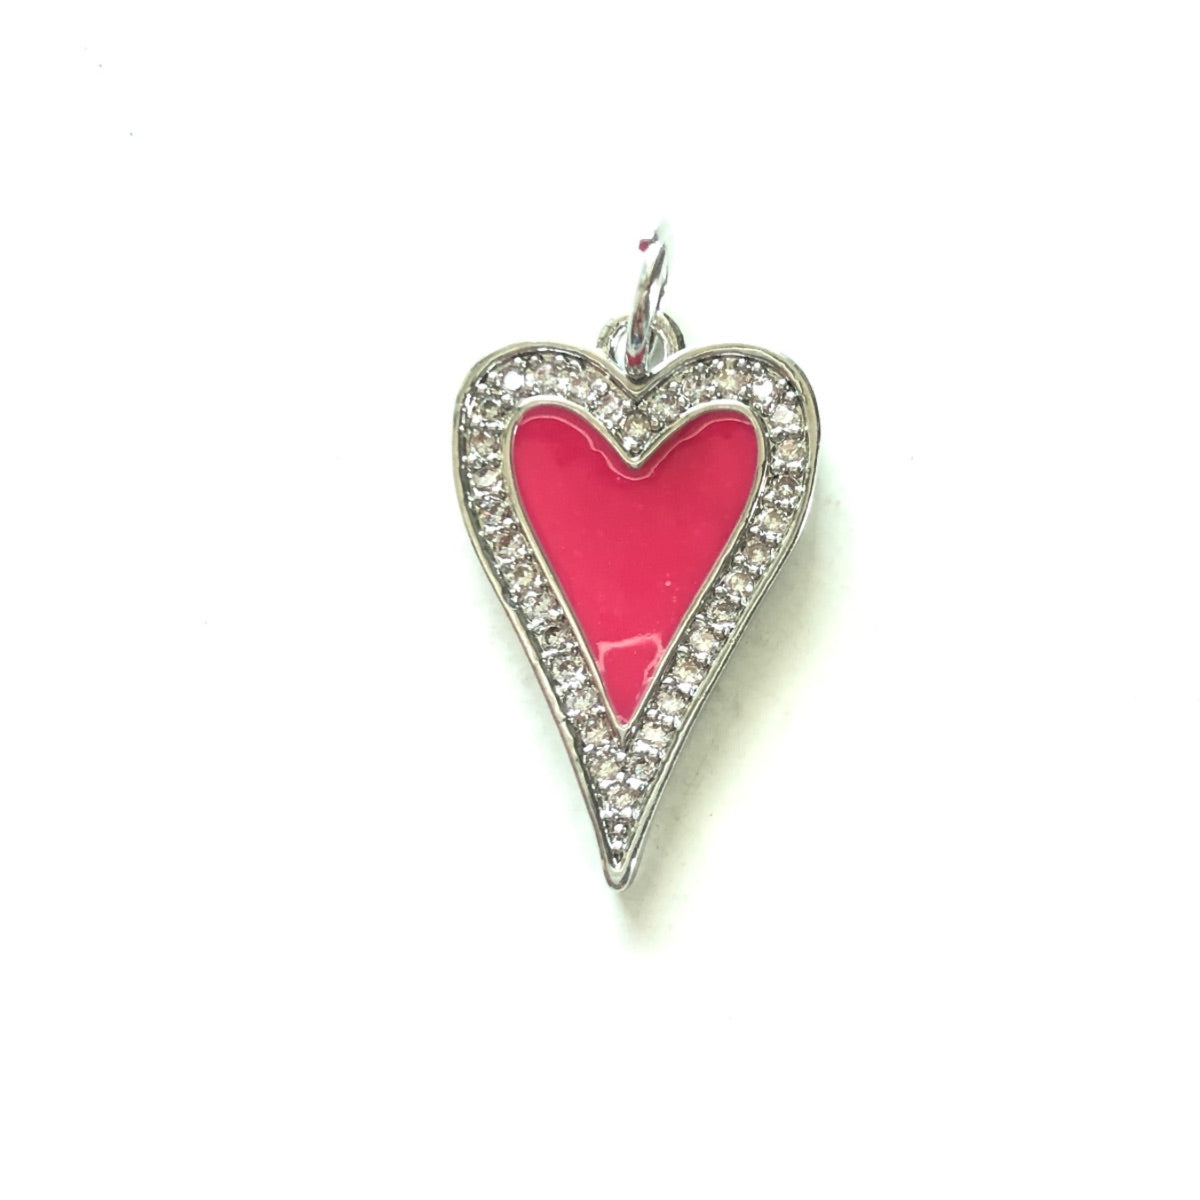 10pcs/lot 23.4*14.6mm Red, Pink, White, Black, Fuchsia Enamel CZ Pave Heart Charms-Silver Fuchsia CZ Paved Charms Hearts New Charms Arrivals Charms Beads Beyond